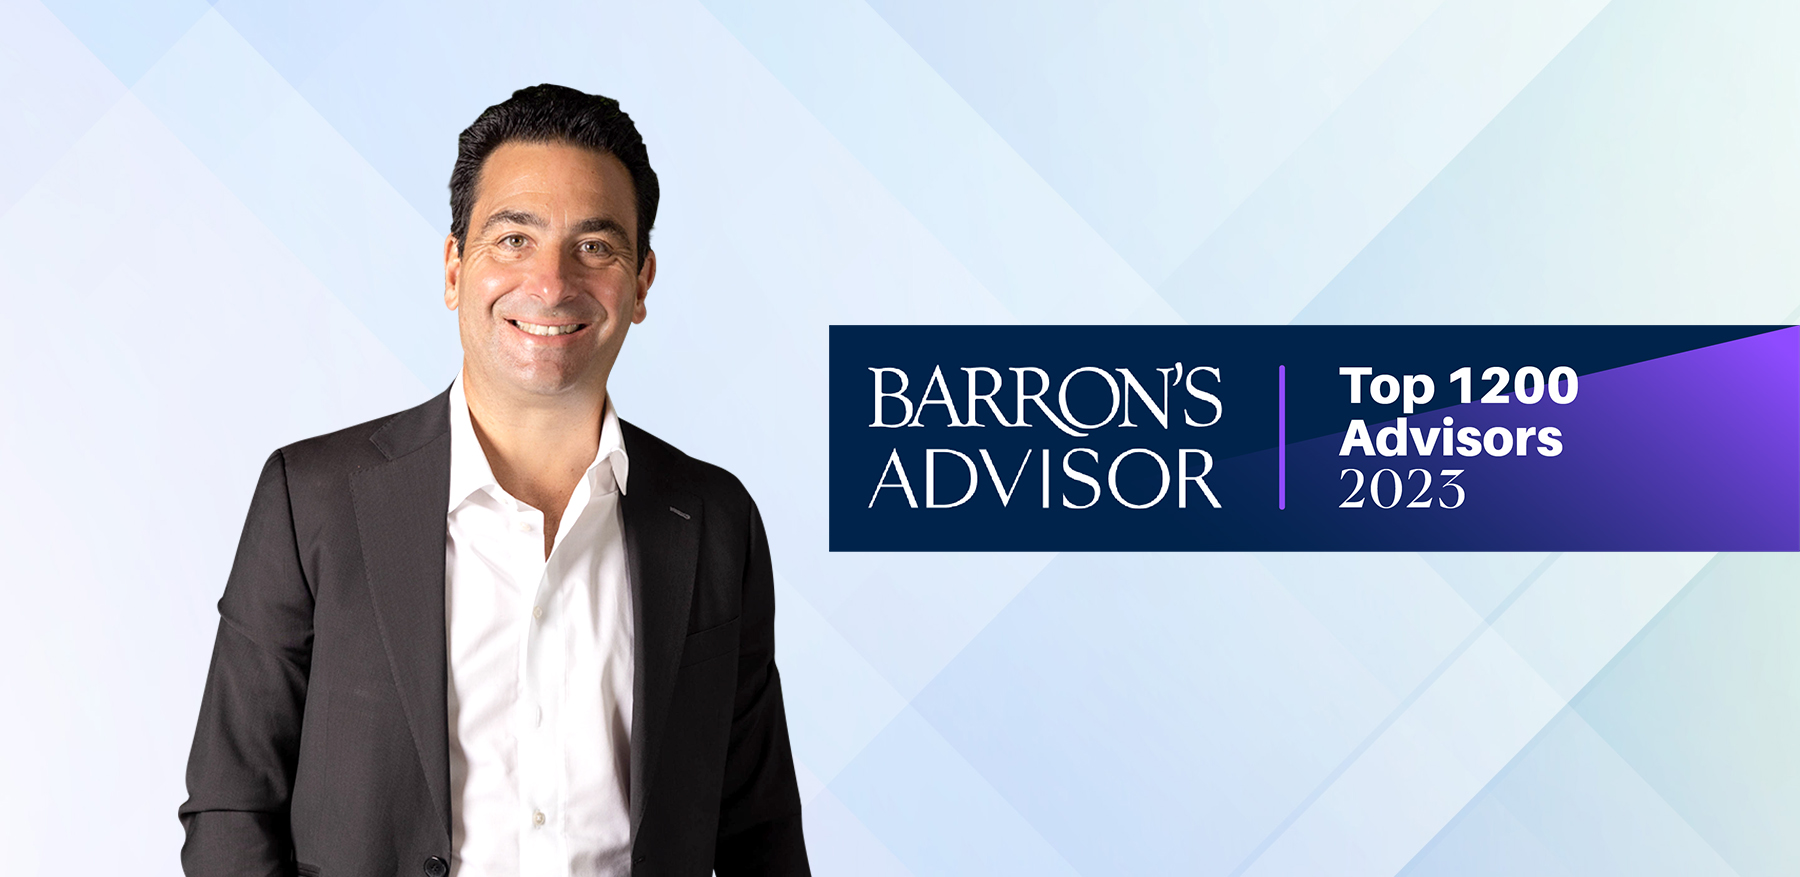 GMAG ranked #10 in New York on Barron’s Top 1200 List